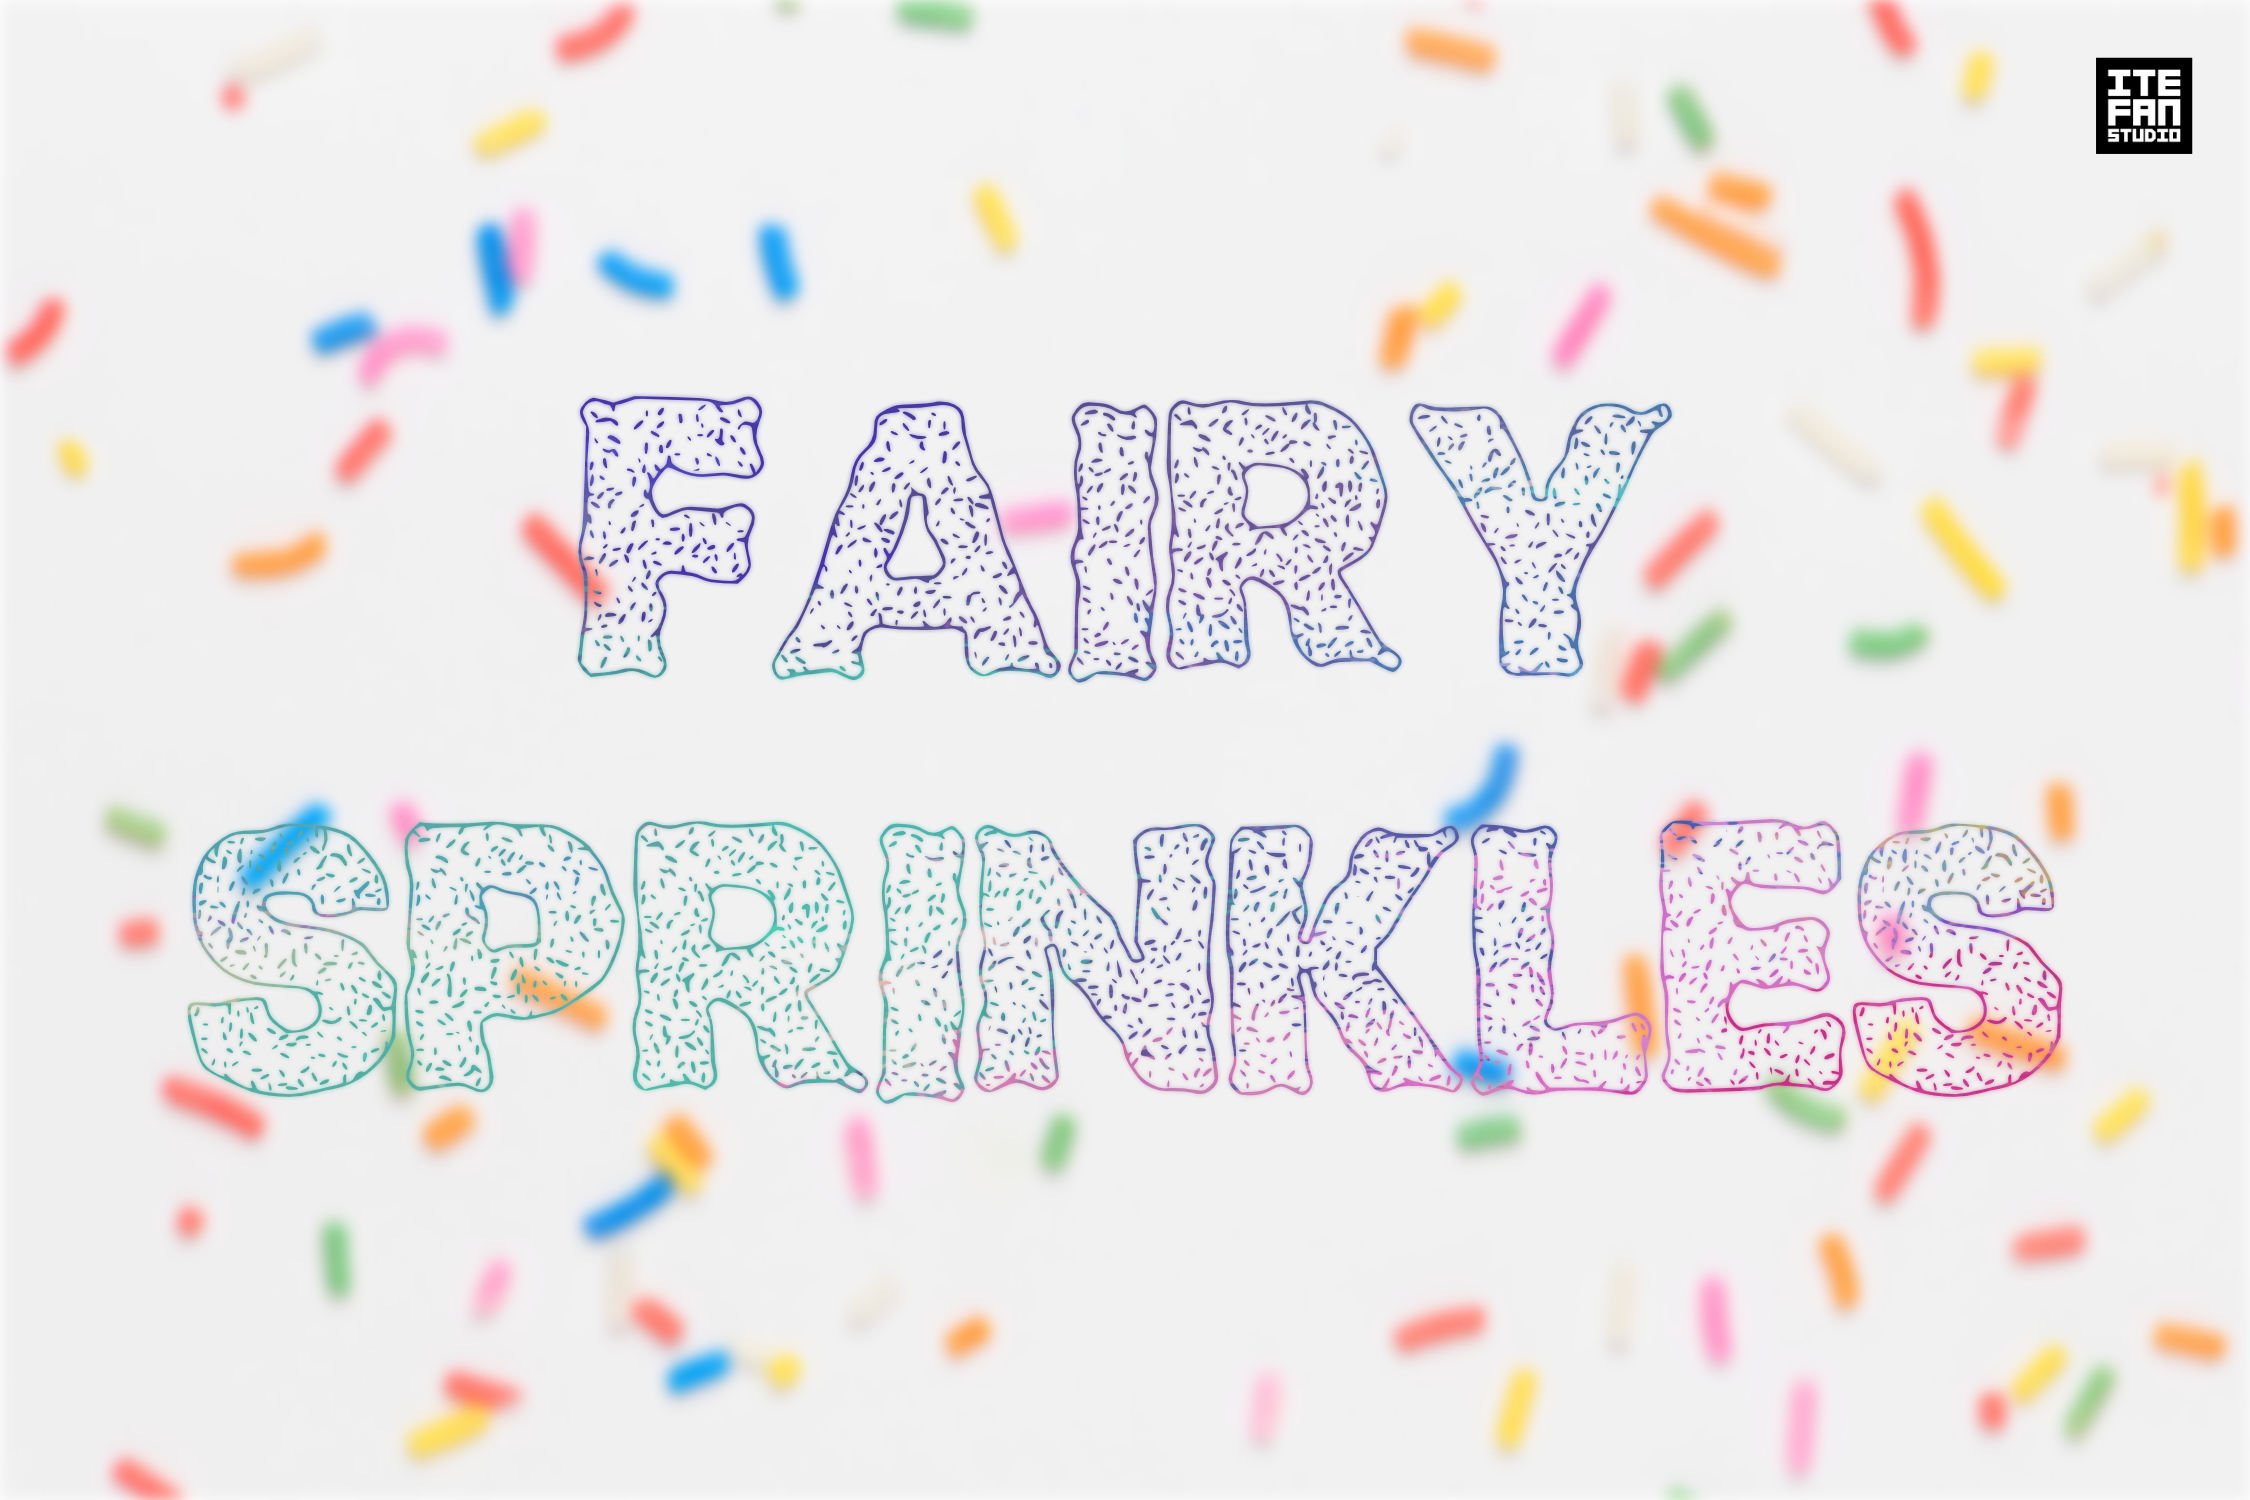 Fairy Sprinkles Font cover image.